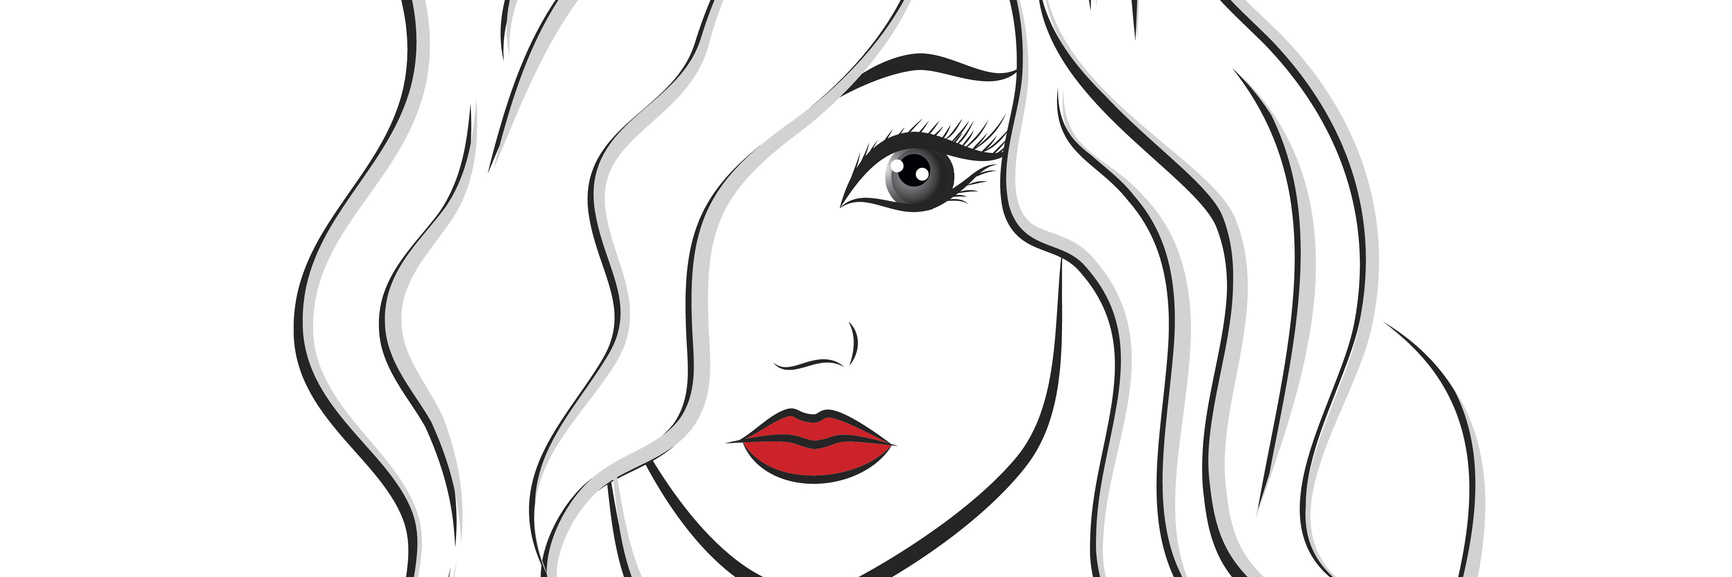 drawing of a woman with red lips and hair blowing around her face